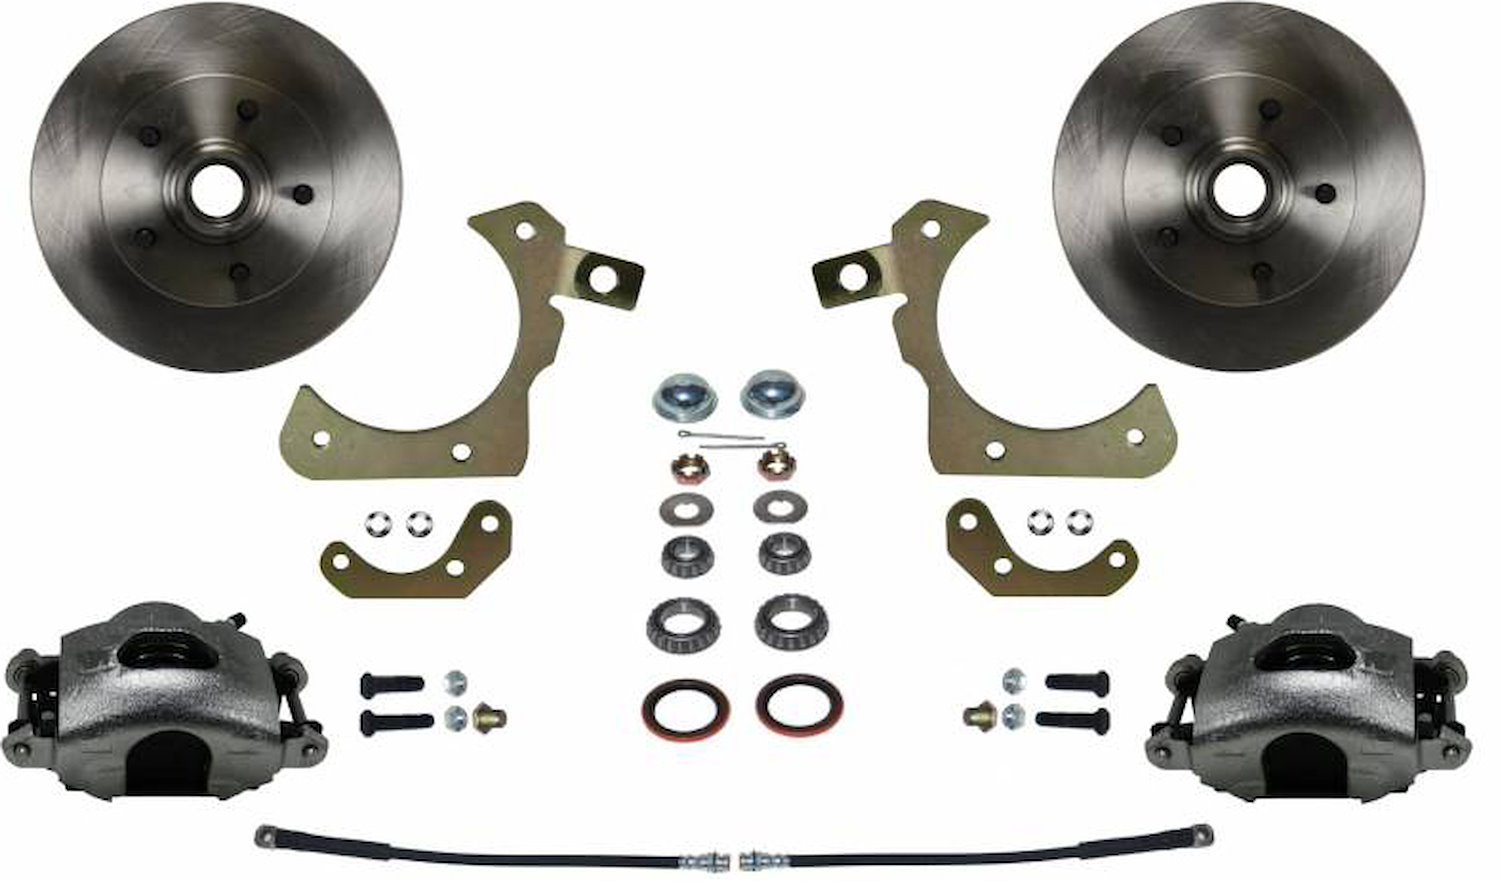 1955-1958 Chevy Tri-Five, GM Full Size Front Spindle Mount Kit w/ Factory Spindles